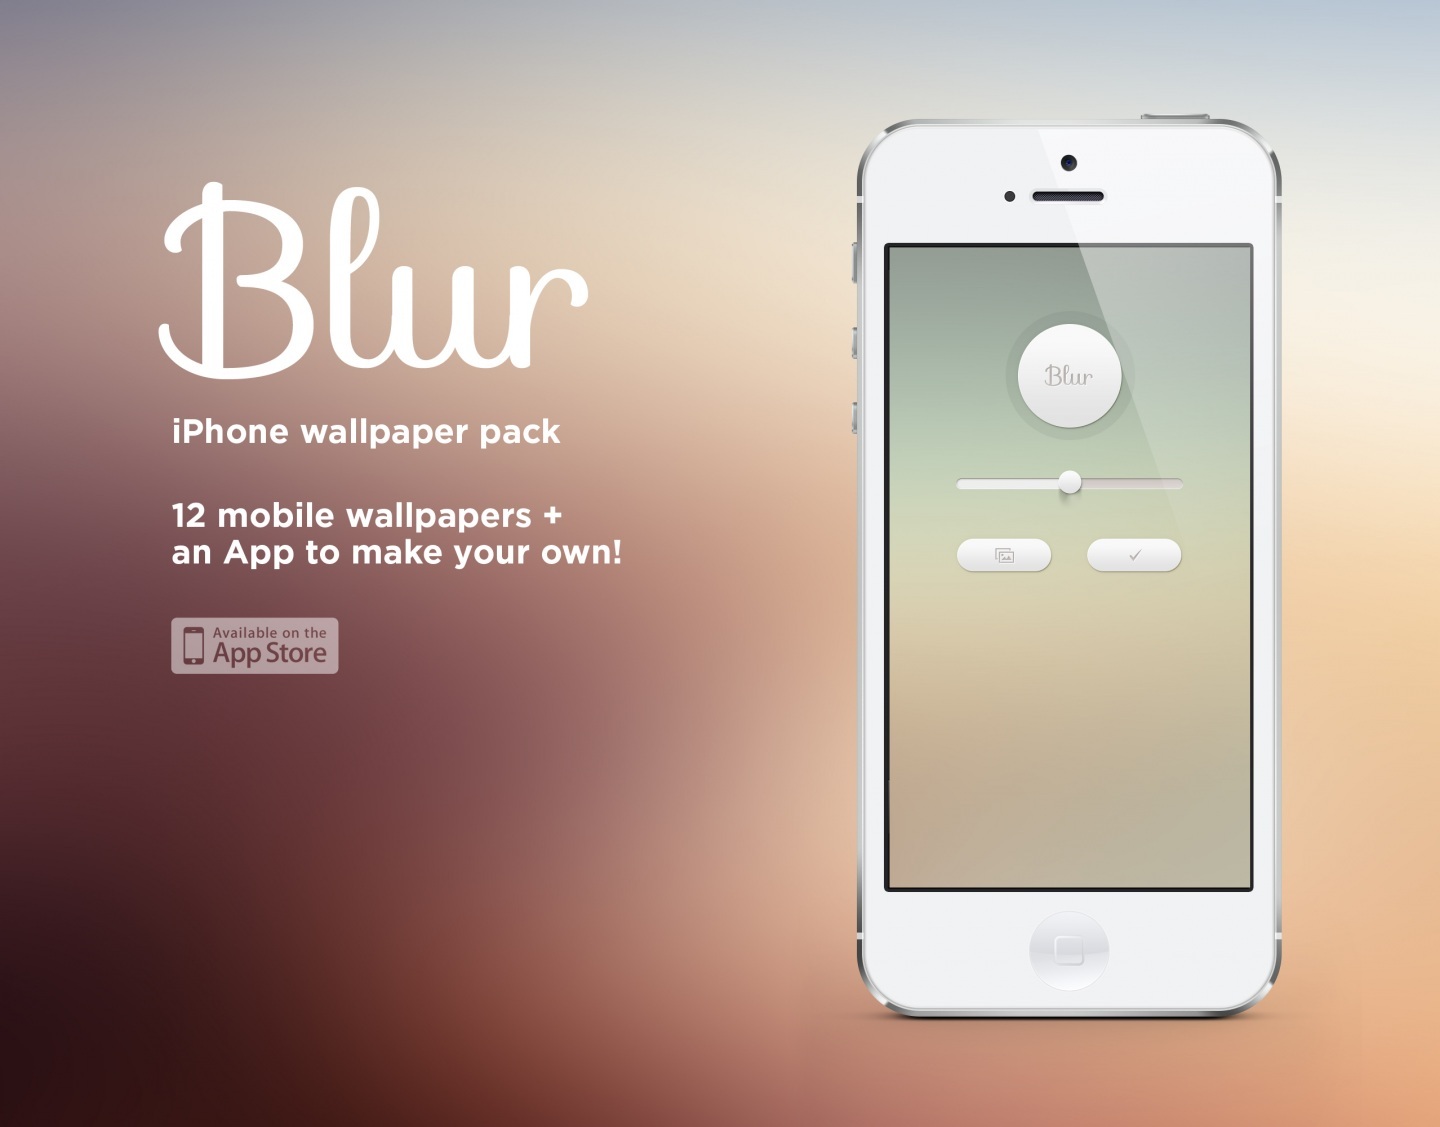 Blur Iphone Wallpaper Pack Mobile Smartphone An App To Make Your Own